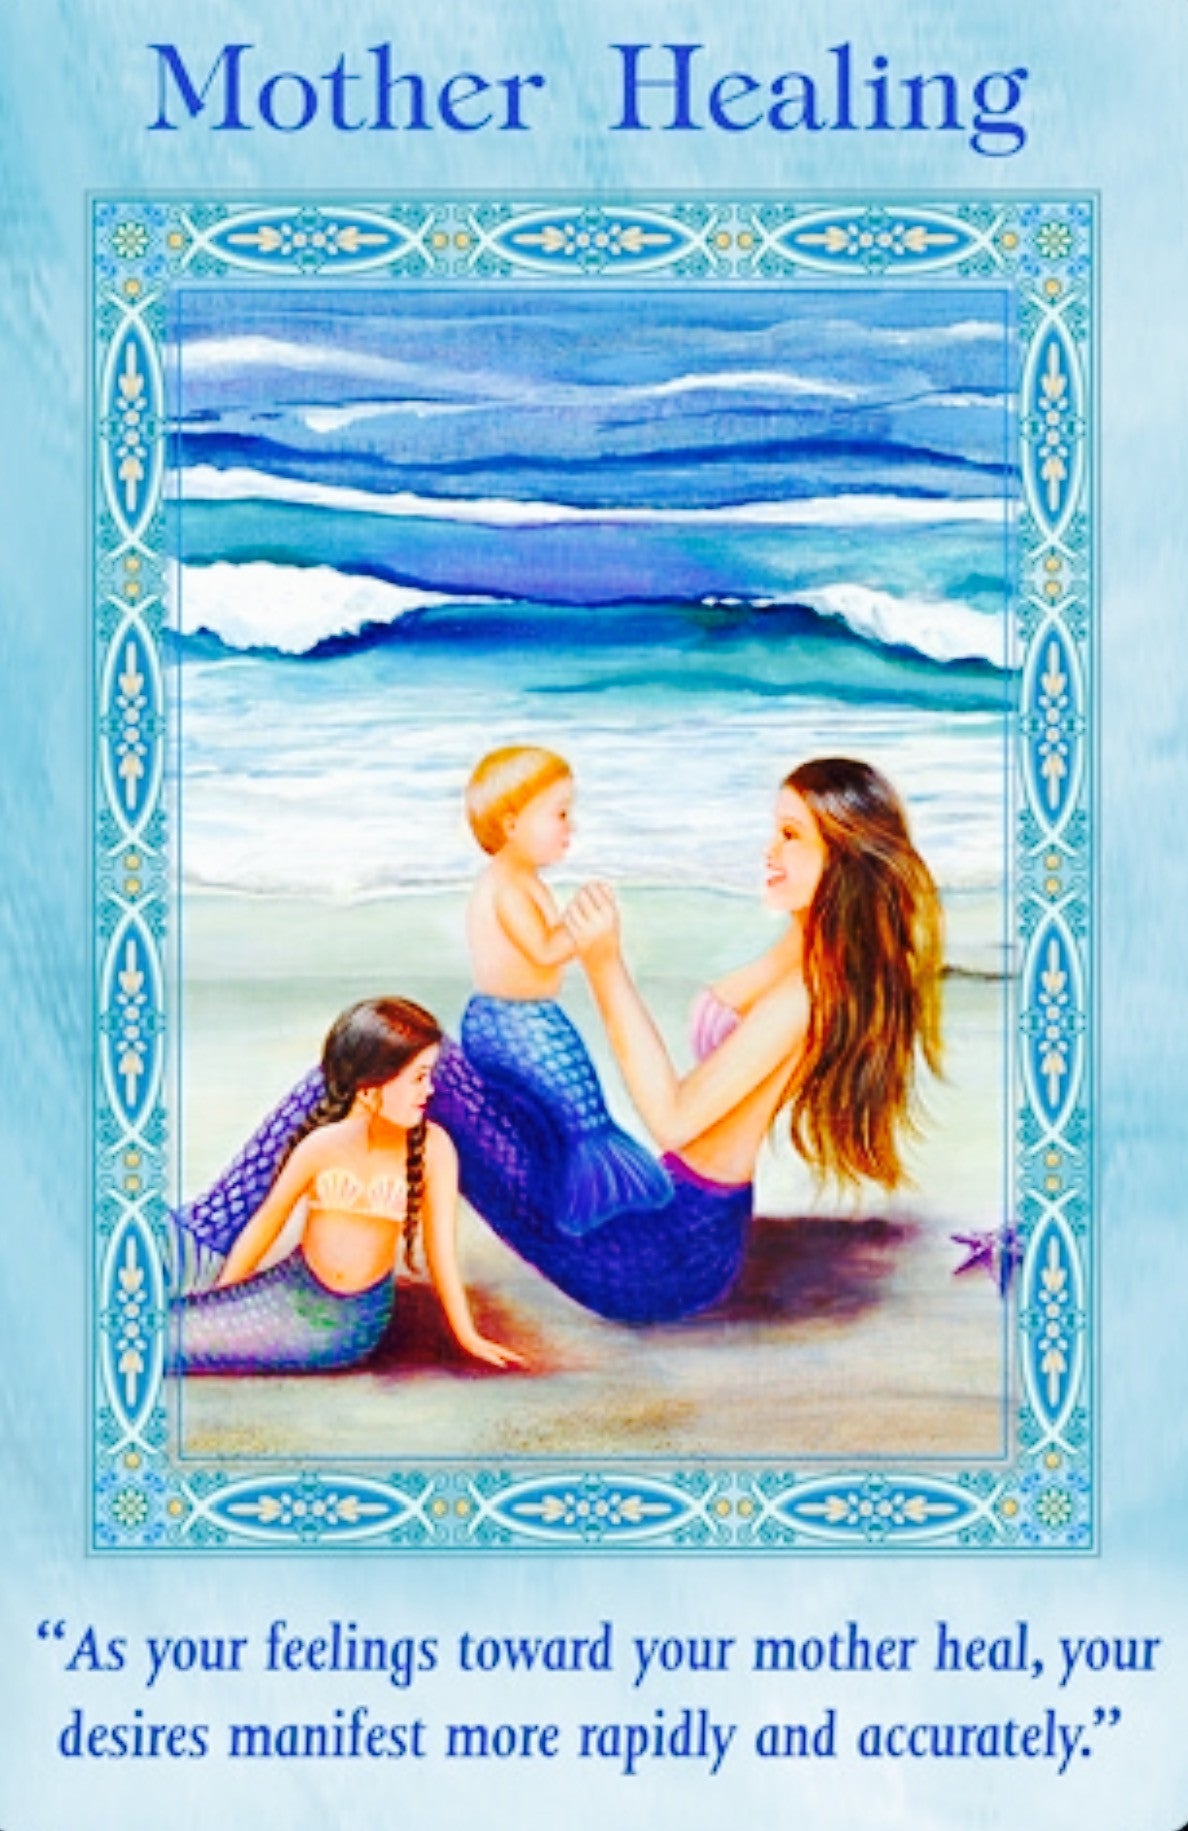 "As your feelings toward your mother heal, your desires manifest more rapidly and accurately."